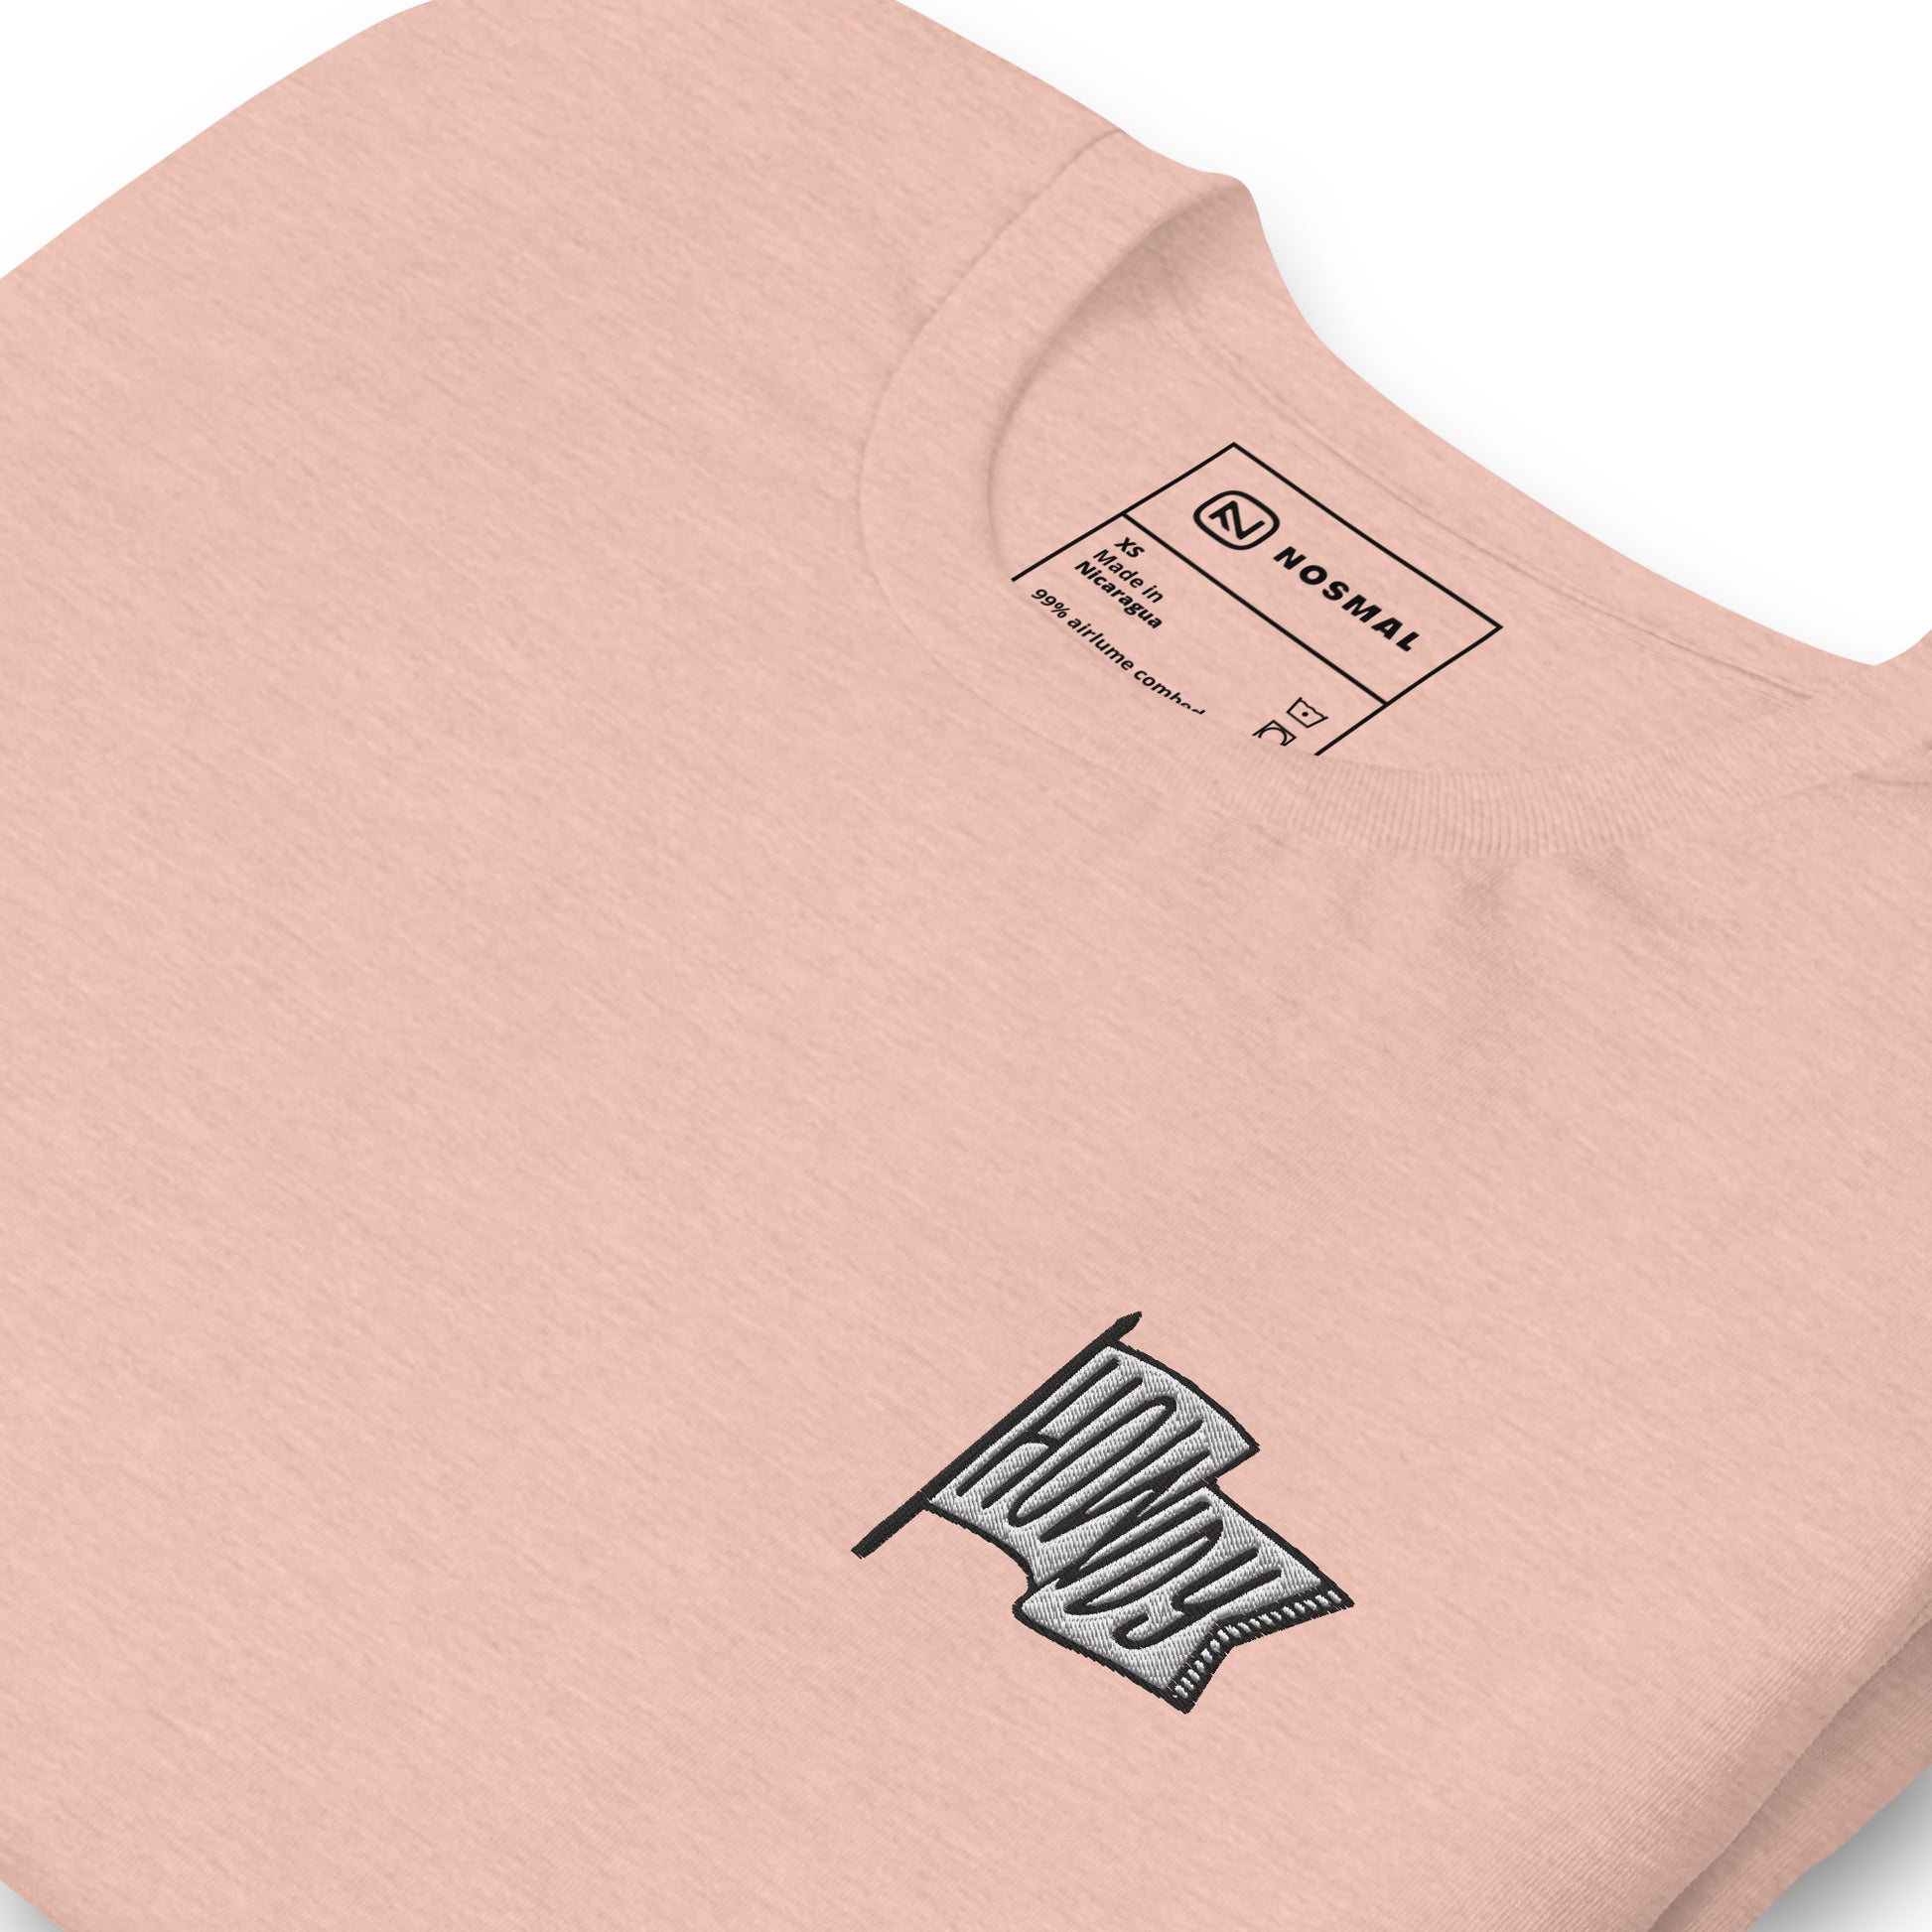 Angled close up howdy embroidered design on heather prism peach unisex t-shirt.